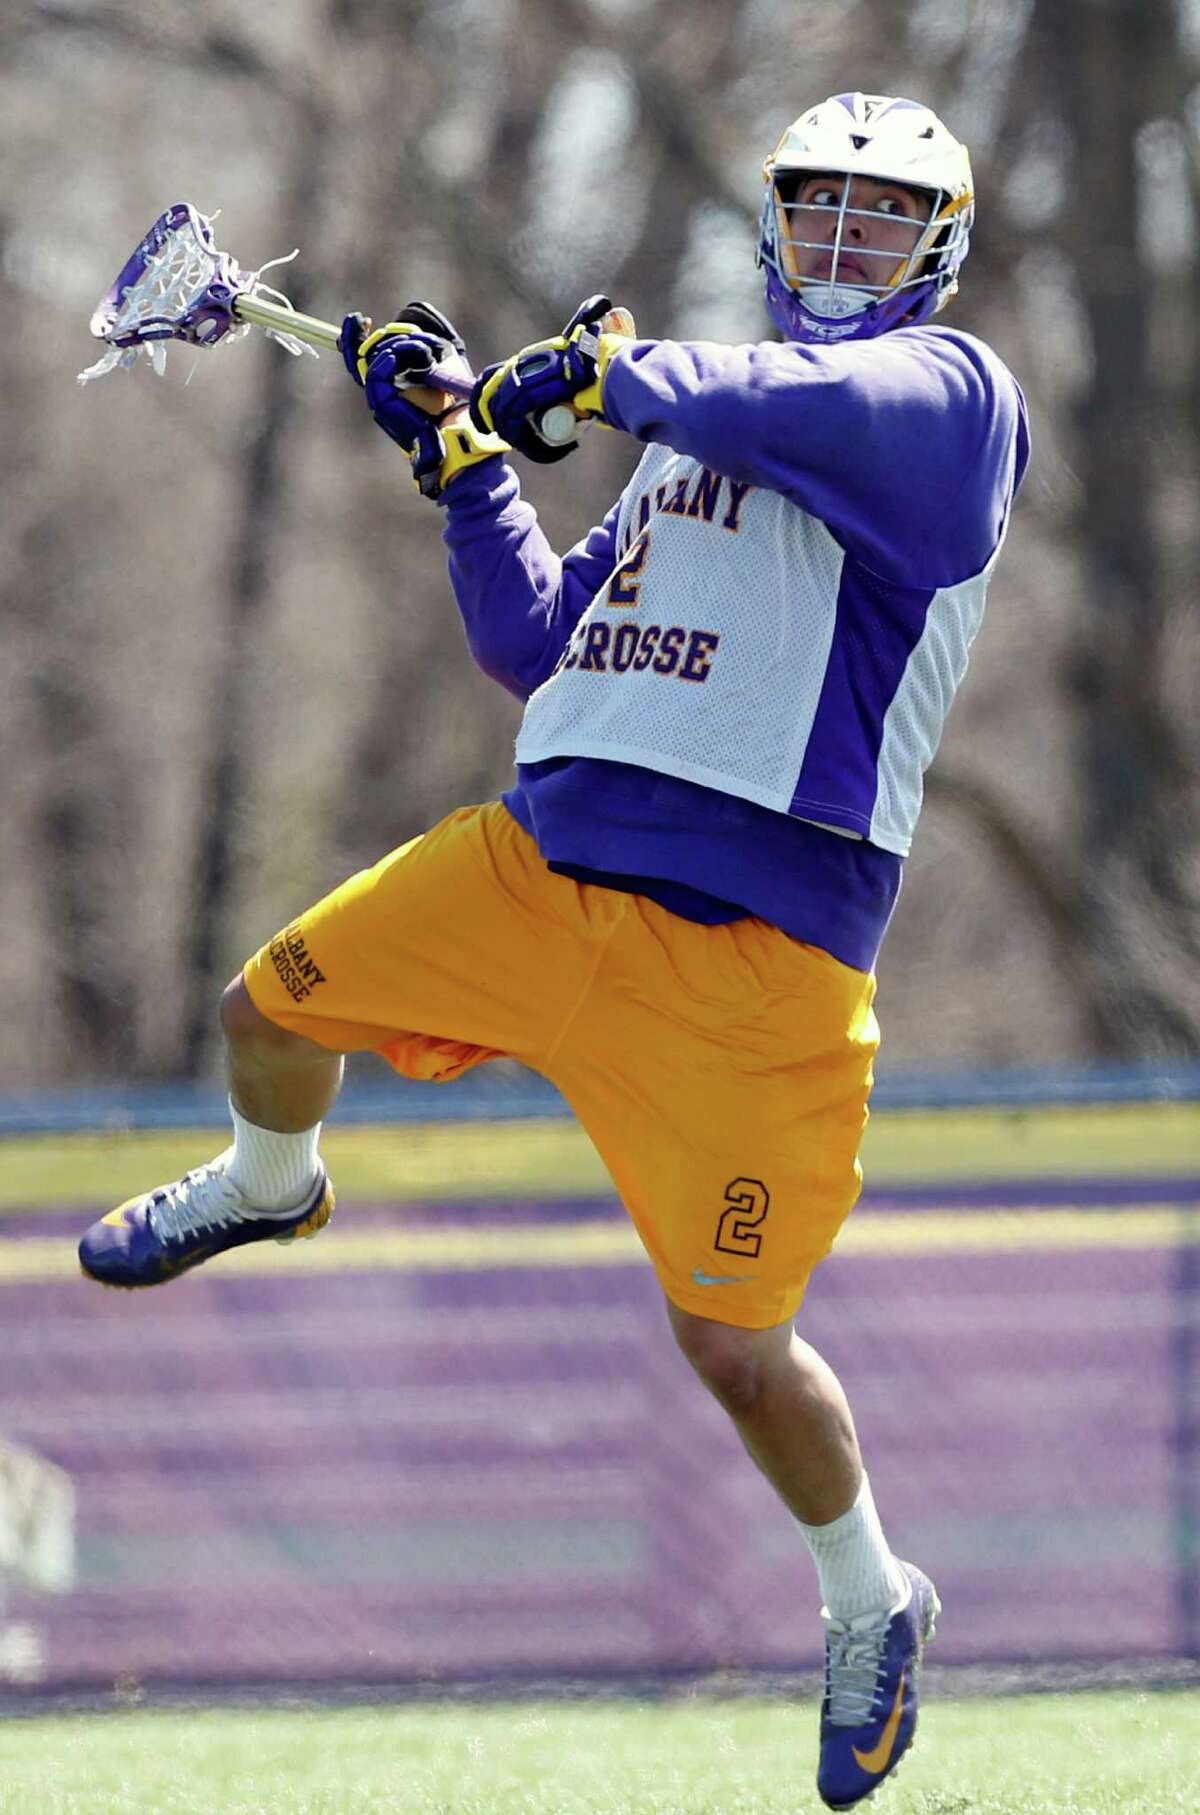 In this photo taken on Monday, April 28, 2014, University at Albany lacrosse player Miles Thompson (2) practices in Albany, N.Y. A trio of Native American players, Miles, younger brother Lyle, and cousin Ty, have transformed Albany into an offensive juggernaut in Division I men's lacrosse. (AP Photo/Mike Groll) ORG XMIT: NYMG203